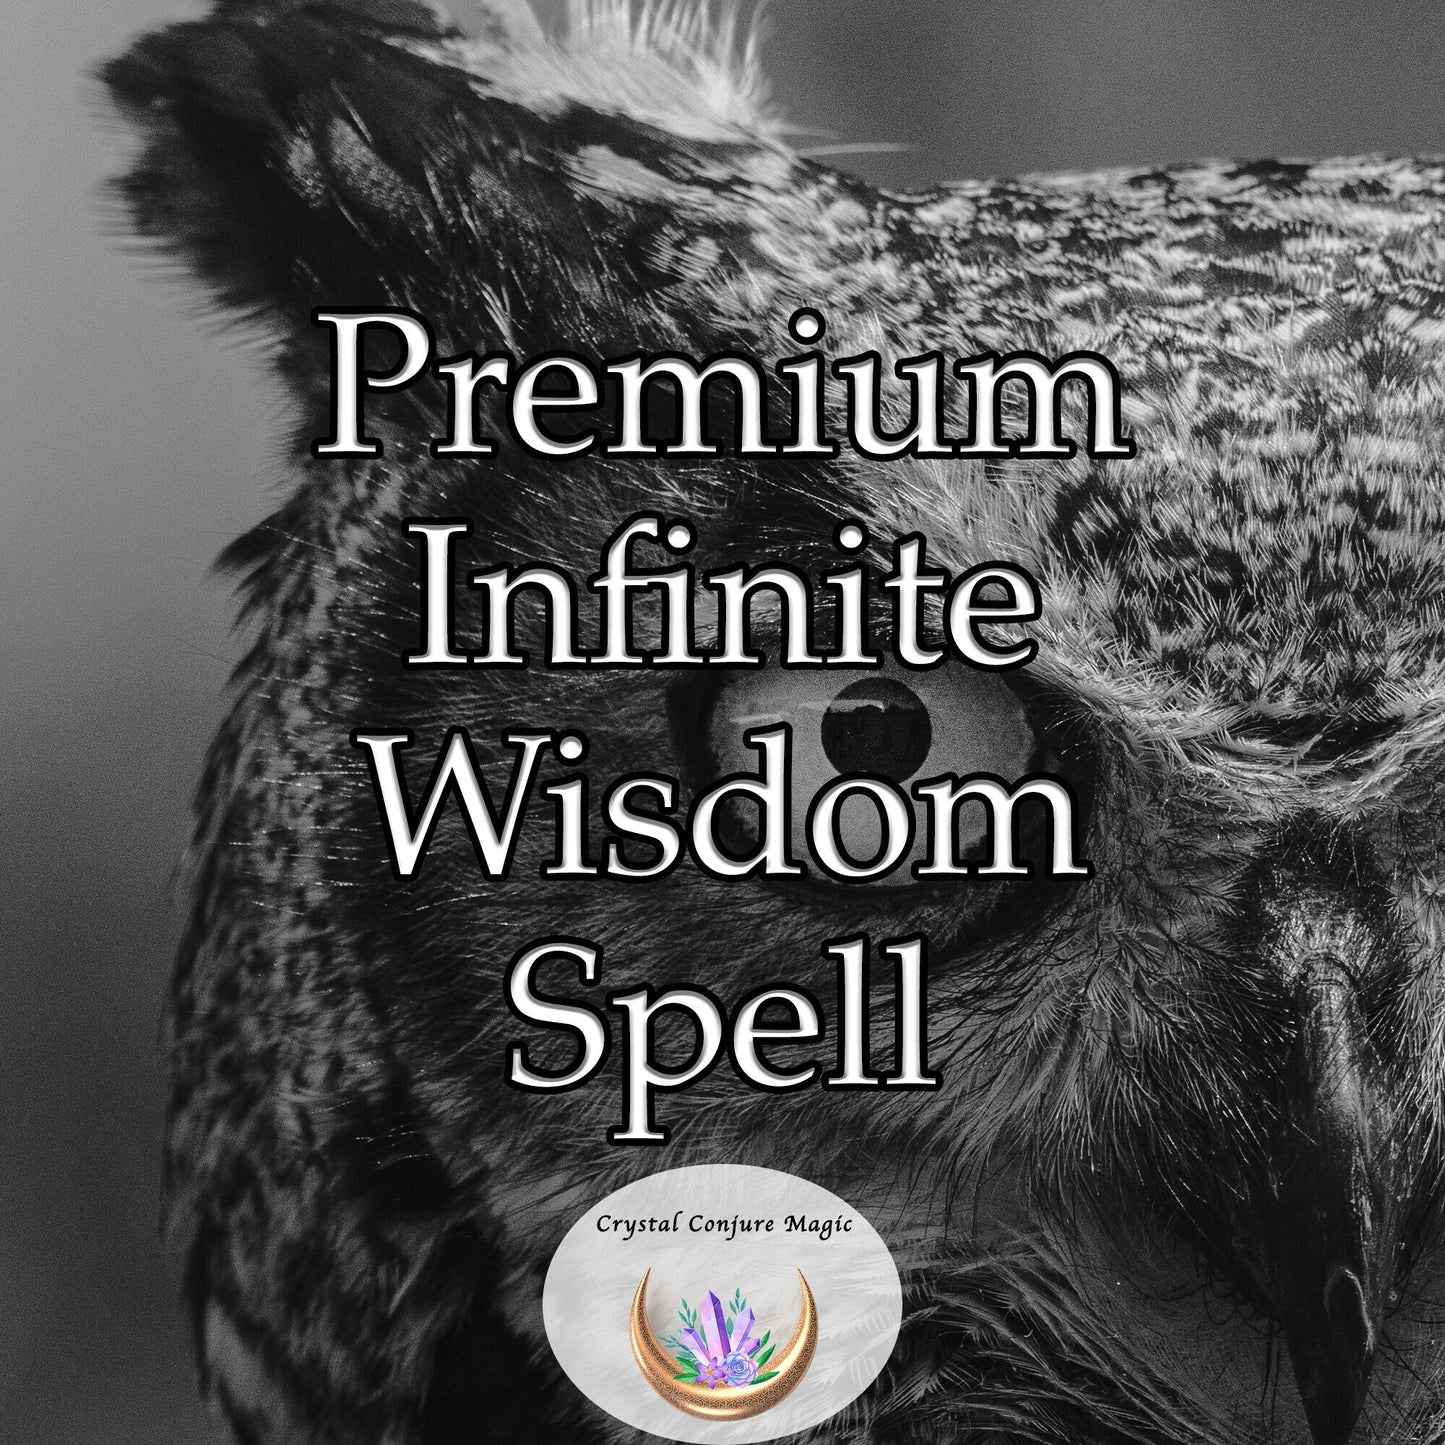 Premium Infinite Wisdom Spell - a wholesome experience of feeling enlightened, wise, and understanding